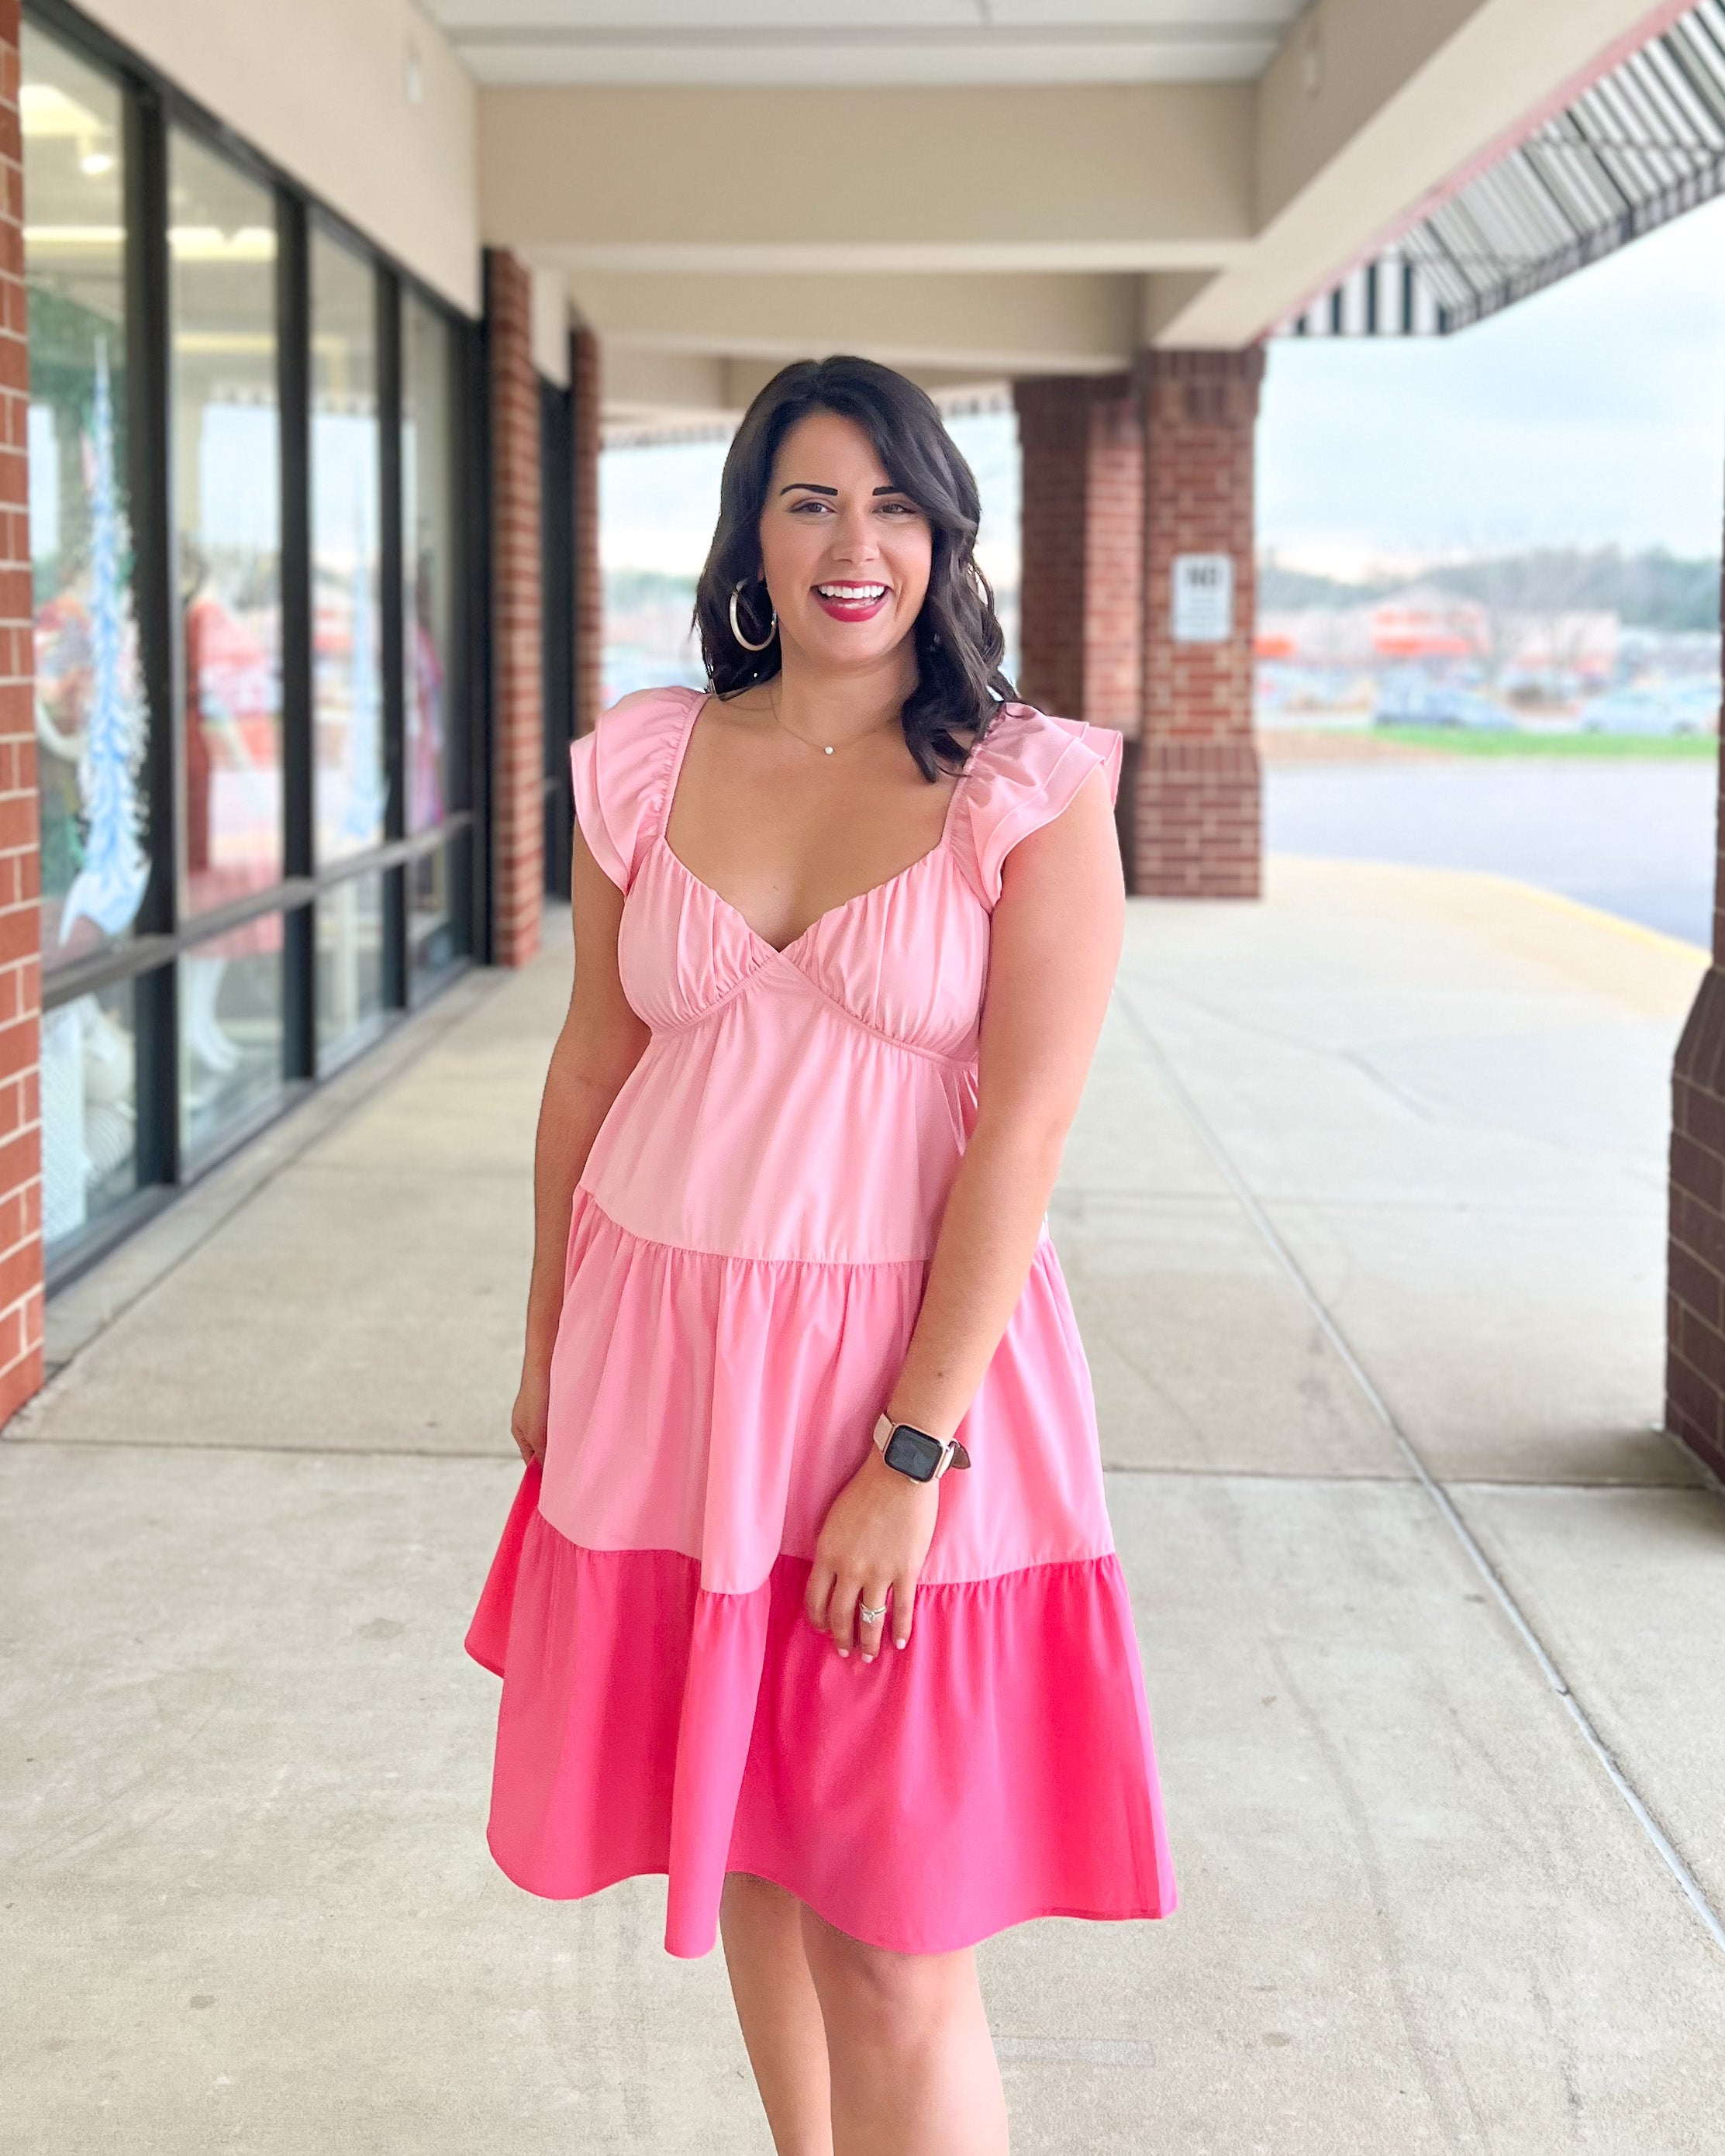 Kori Katherine Dress - Pink Combo, short ruffle cap sleeves, sweetheart neck, tiered, color block, lined, pockets